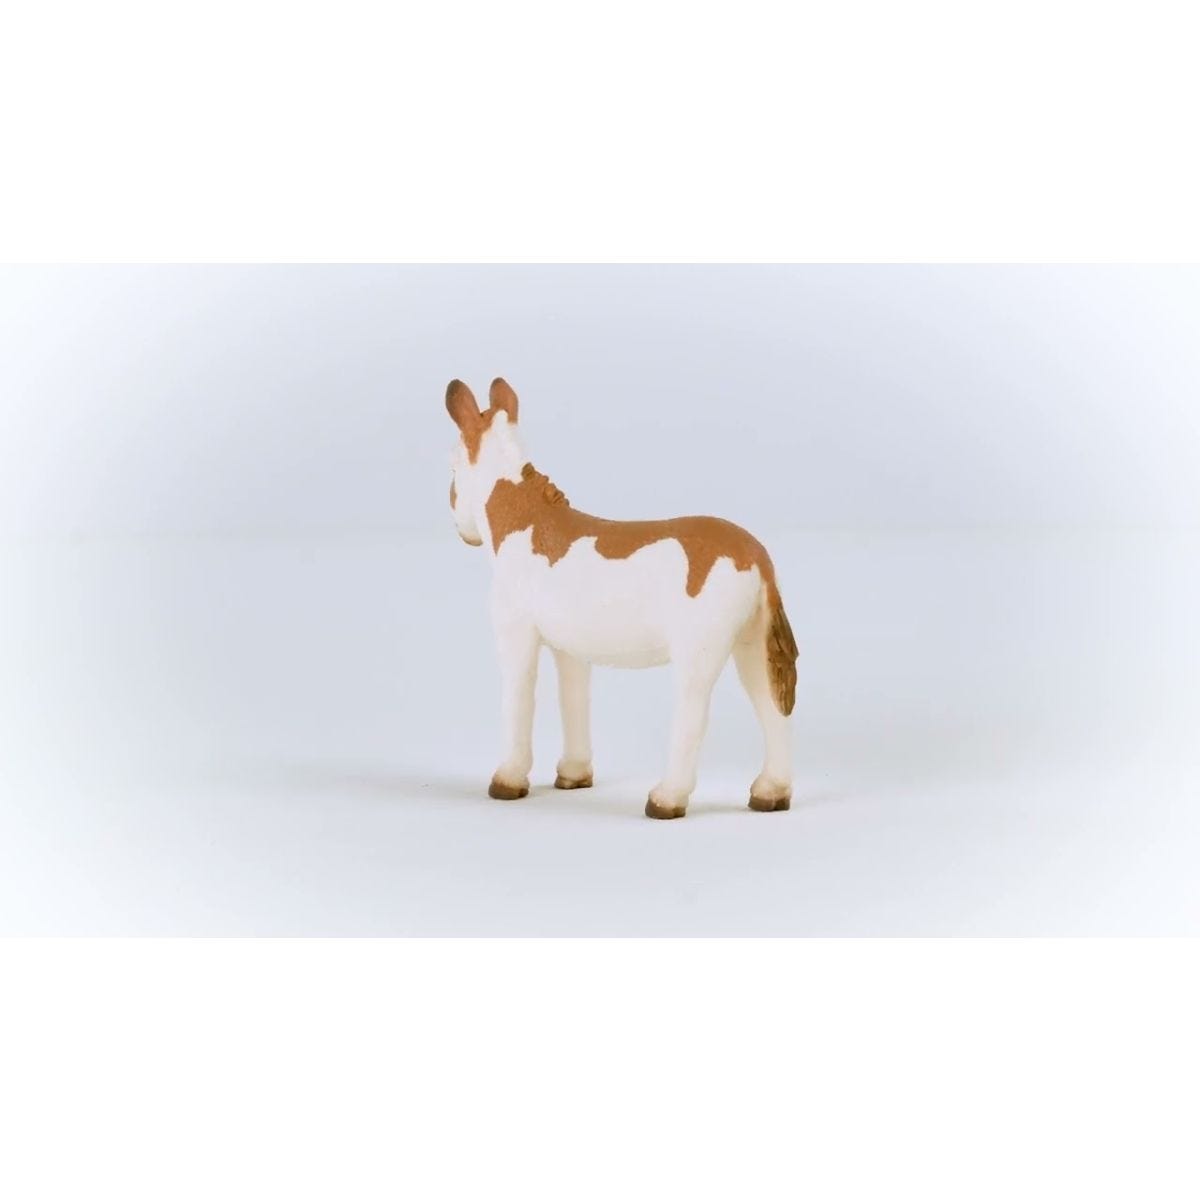 Schleich American Spotted Donkey Animal Toy